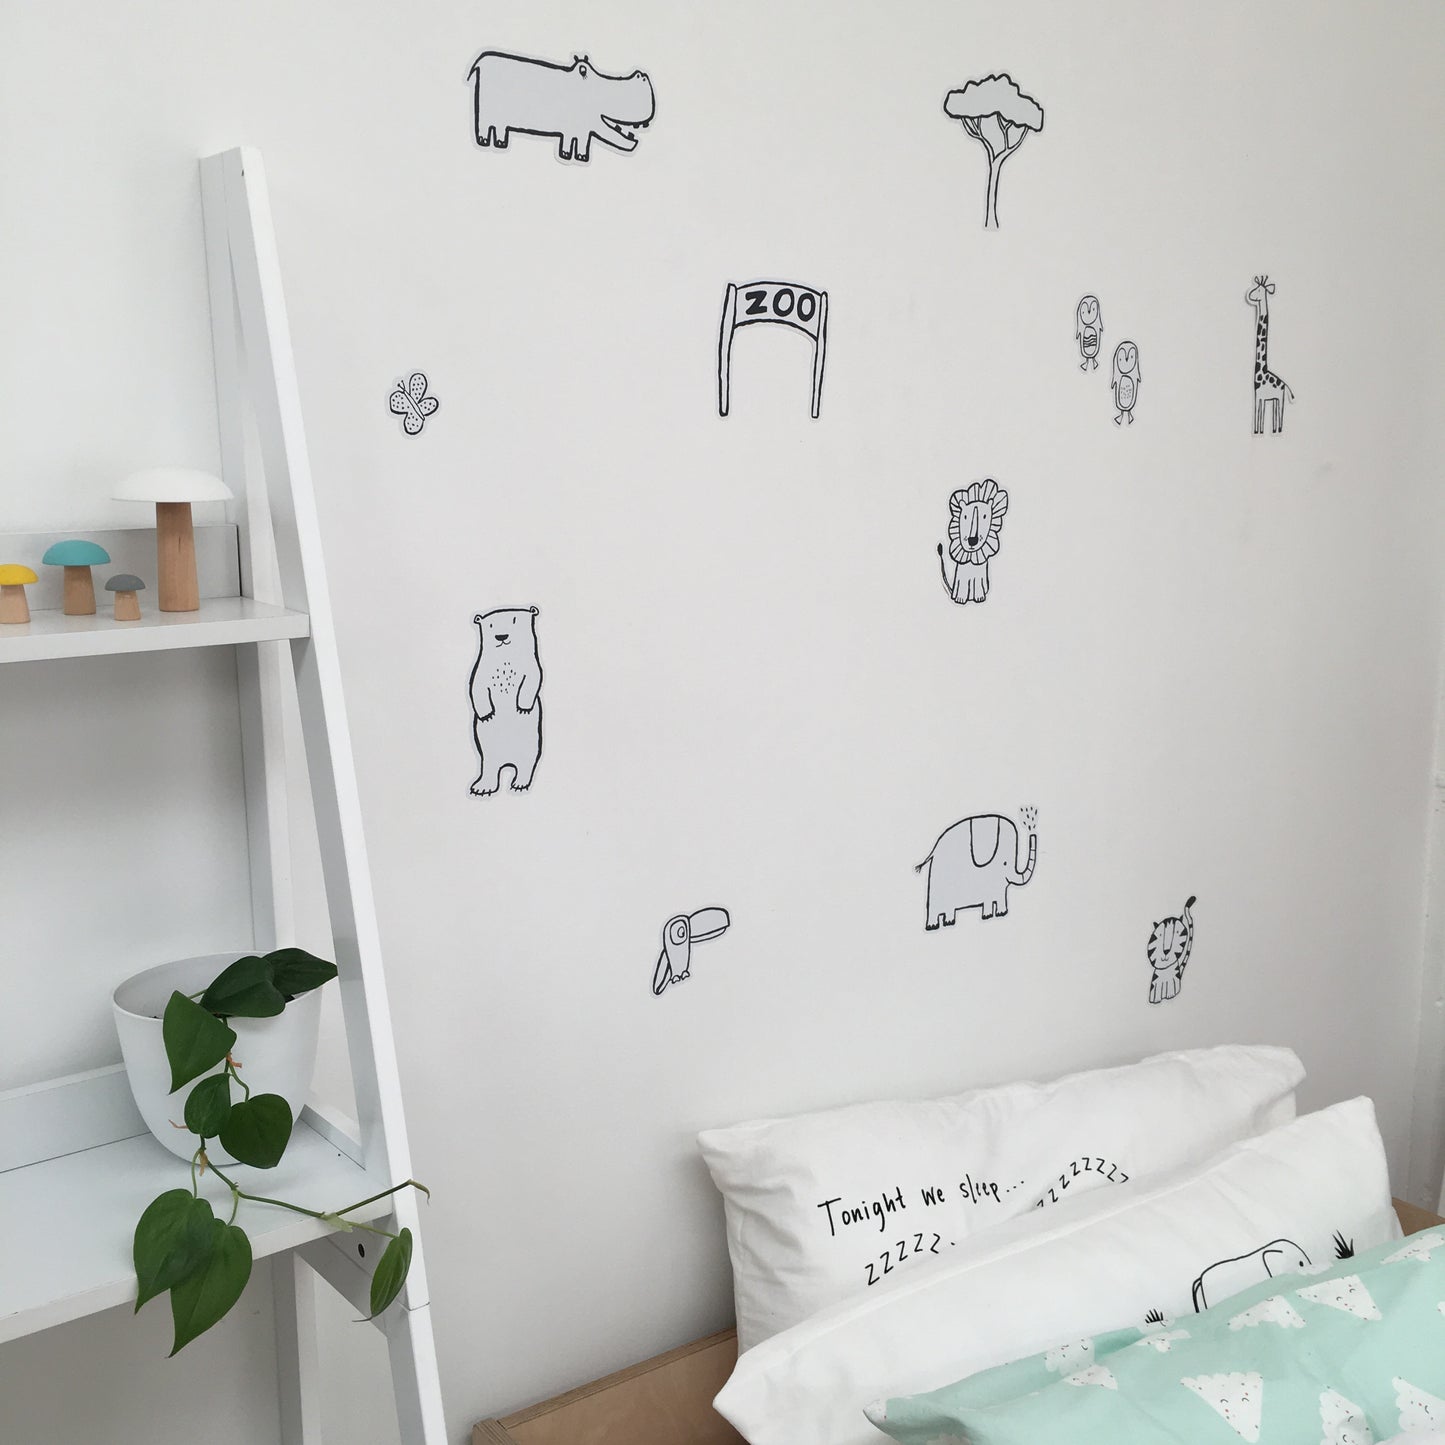 Visit The Zoo Fabric Wall decals